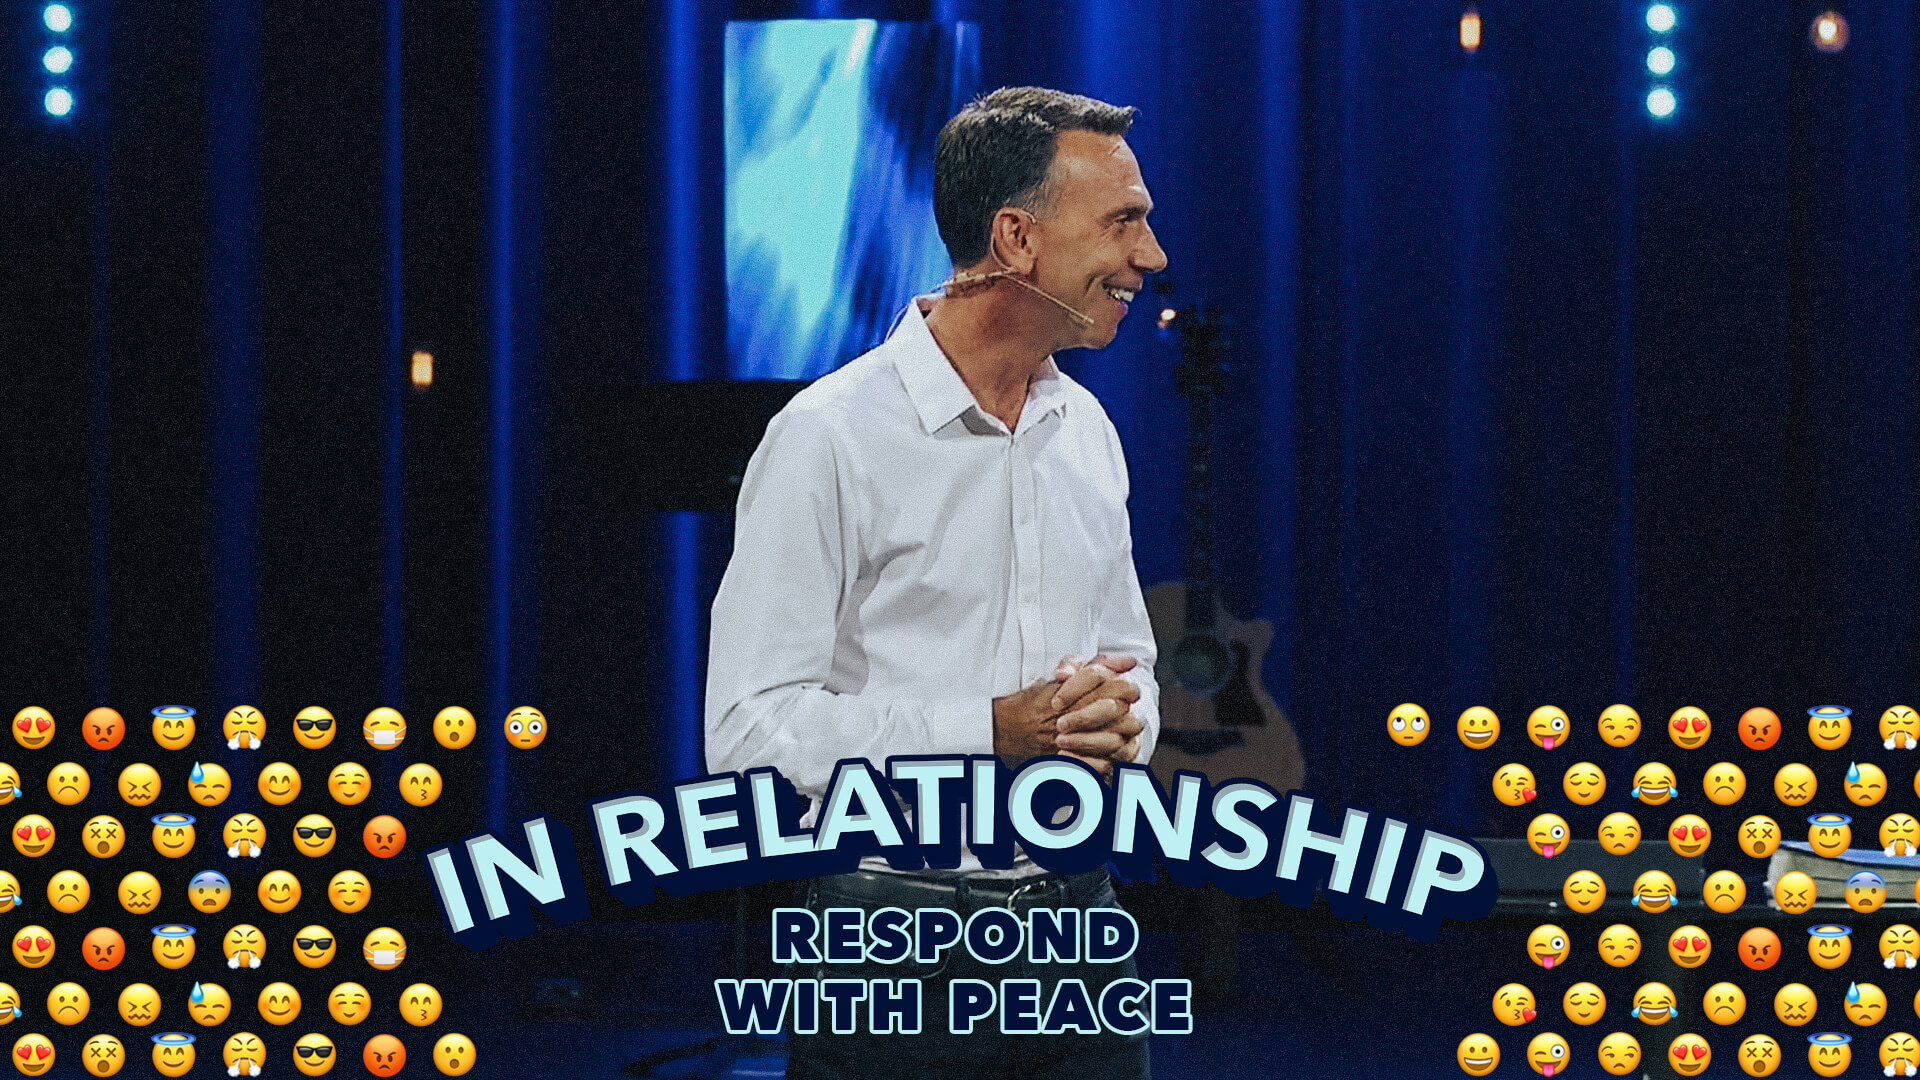 In Relationship, Respond With Peace